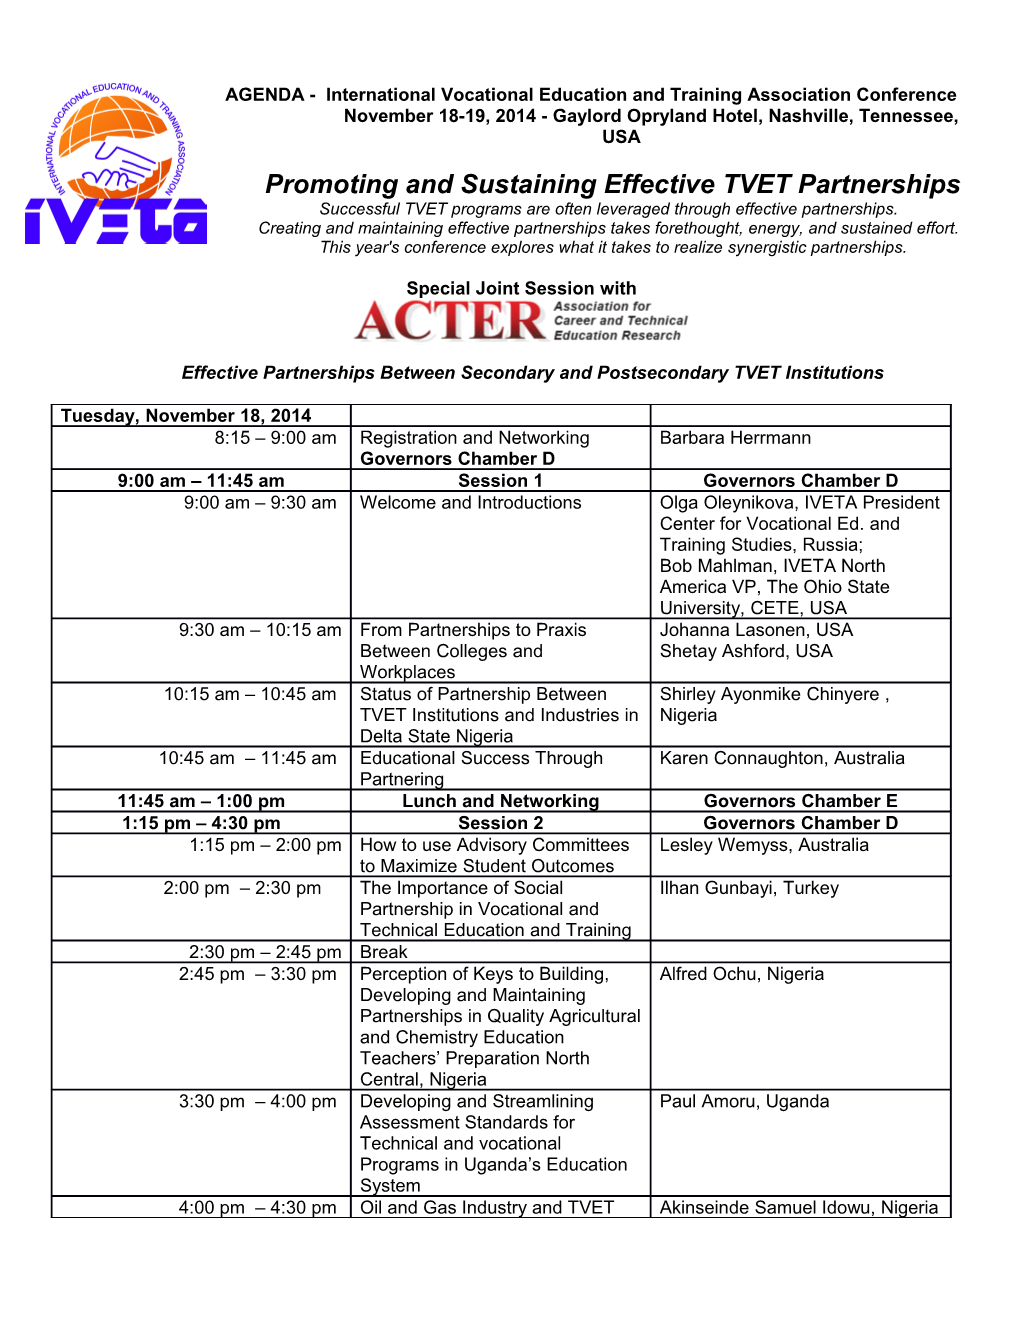 Promoting and Sustaining Effective TVET Partnerships